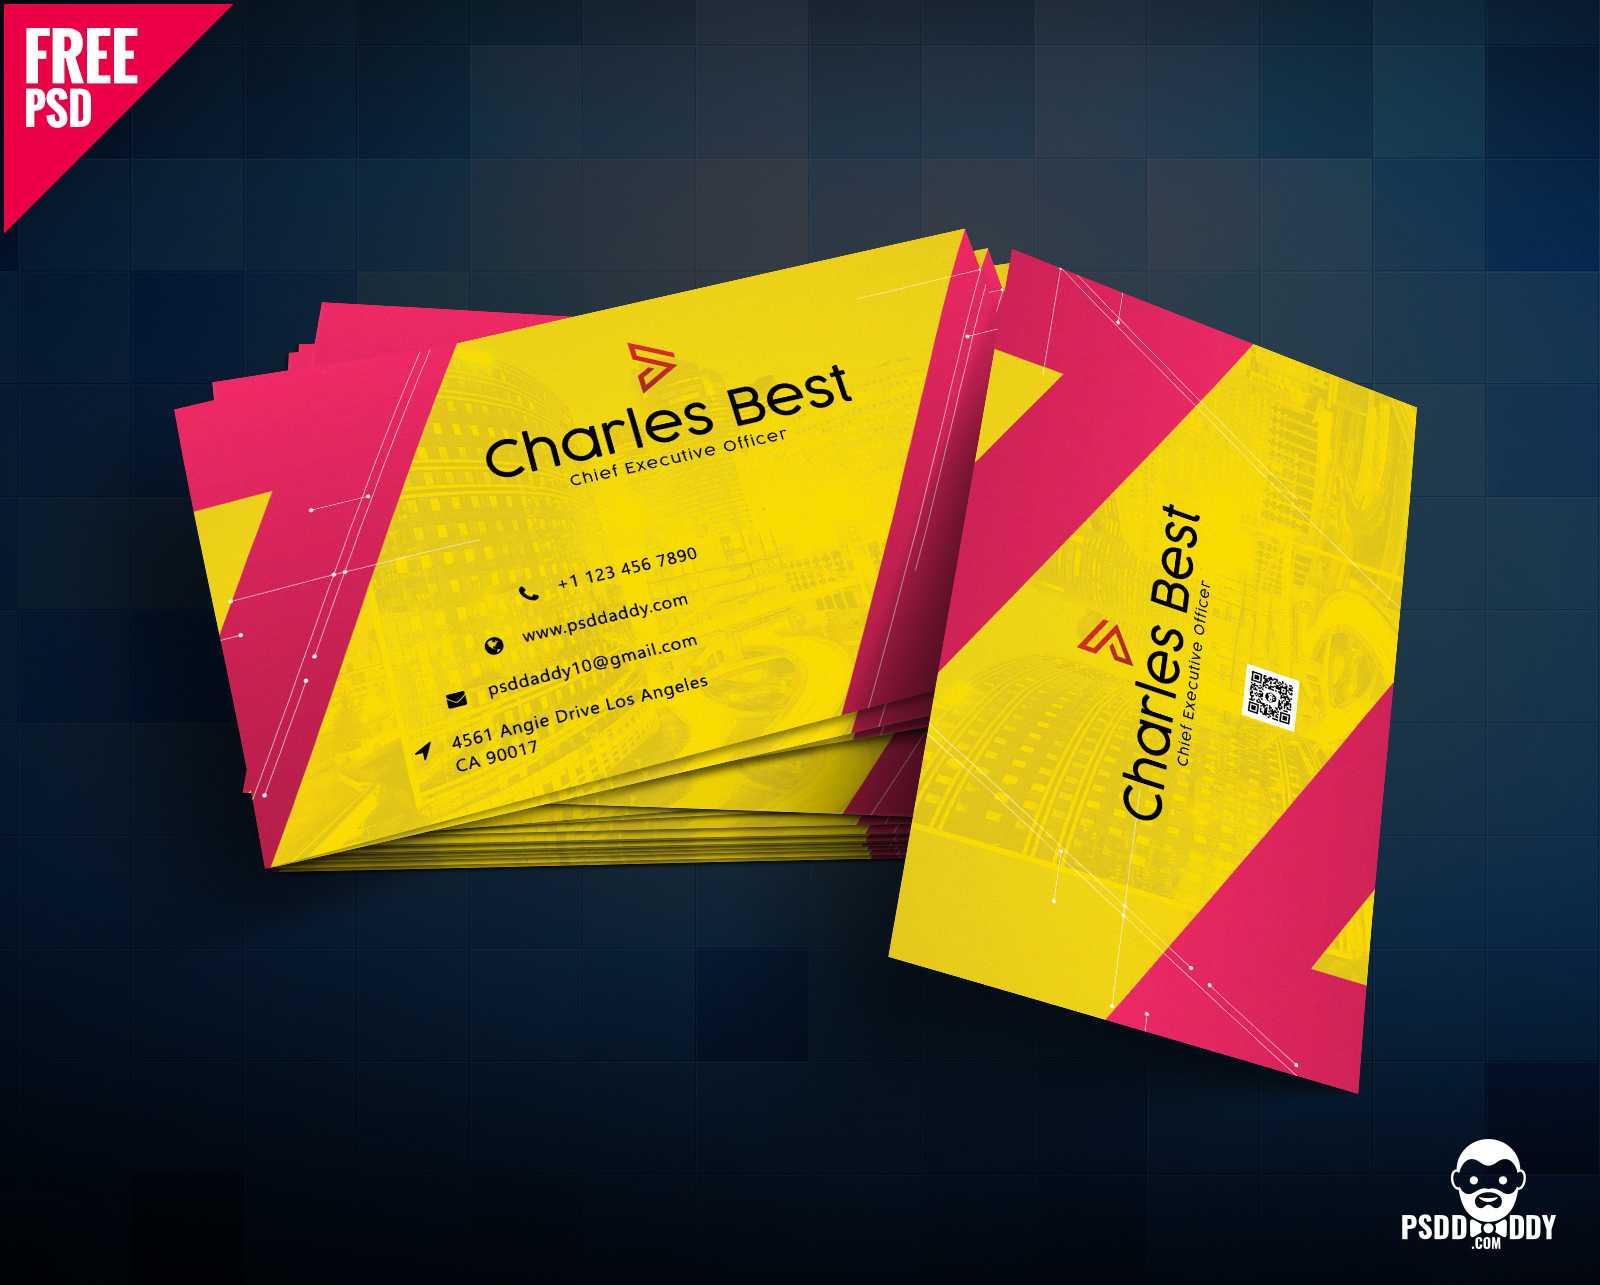 Download] Creative Business Card Free Psd | Psddaddy Within Visiting Card Templates Psd Free Download